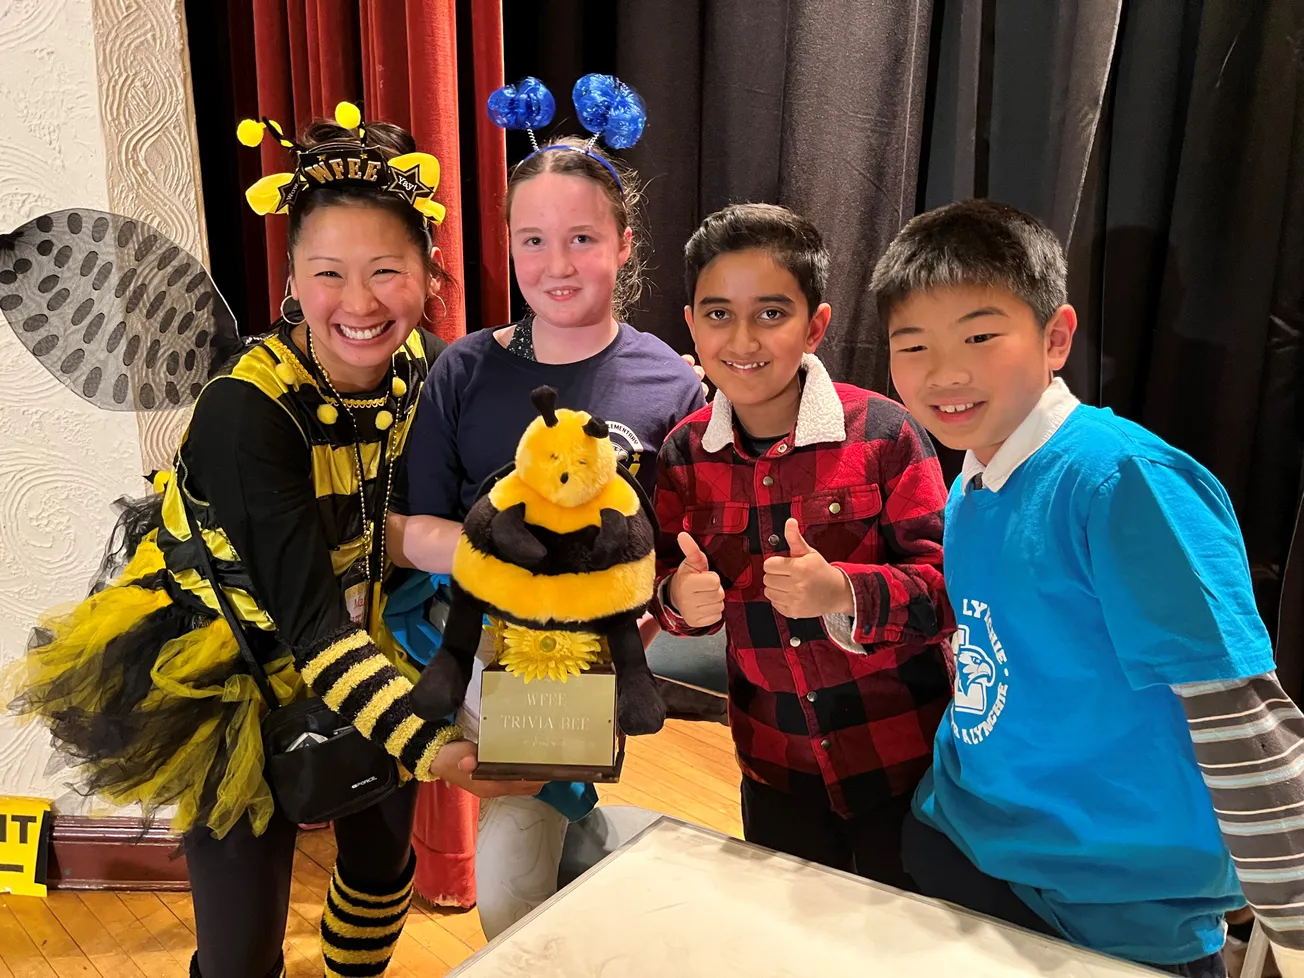 WFFE to hold Trivia Bee on Feb. 7